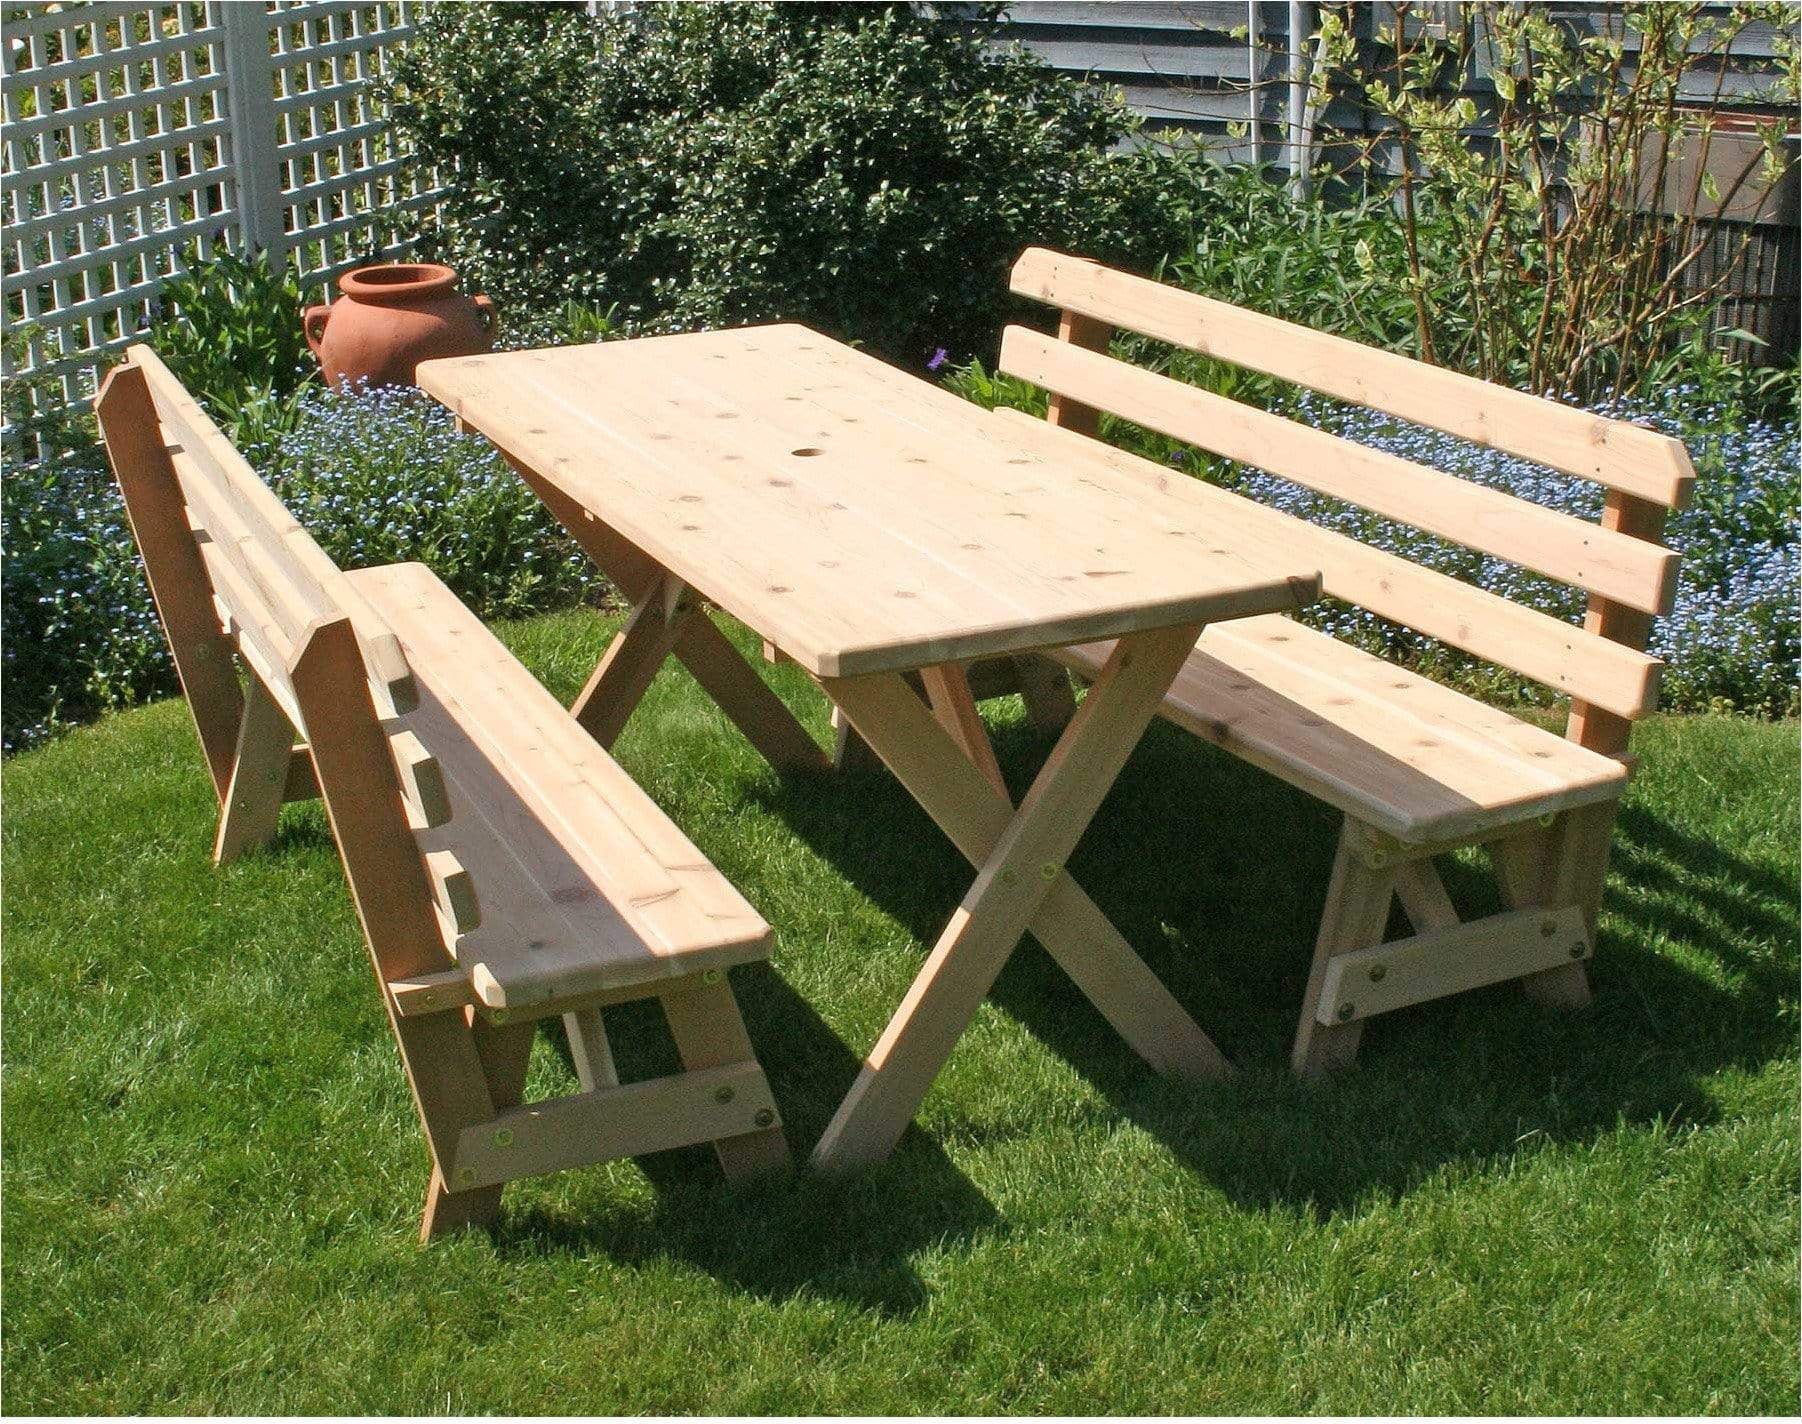 Creekvine Designs Cedar 10' Cross Legged Picnic Table with (4) Backed Benches-Rustic Furniture Marketplace